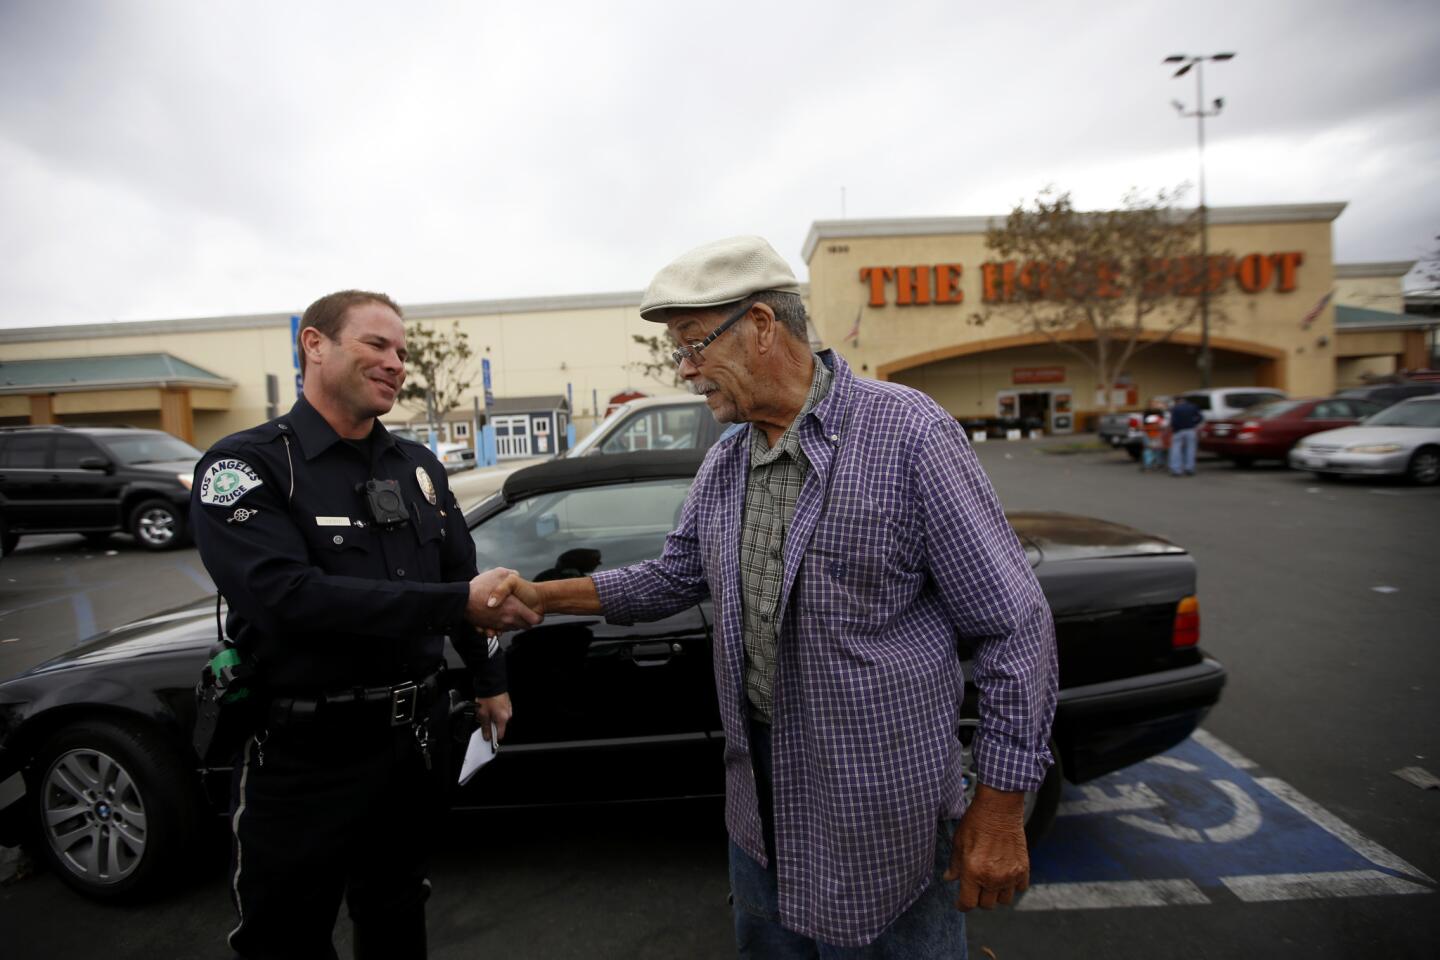 L.A. police Officer Ben Yasnyi, left, greets E. Lagemann, 80, after checking the motorist's disabled placard in a parking lot in South Los Angeles.